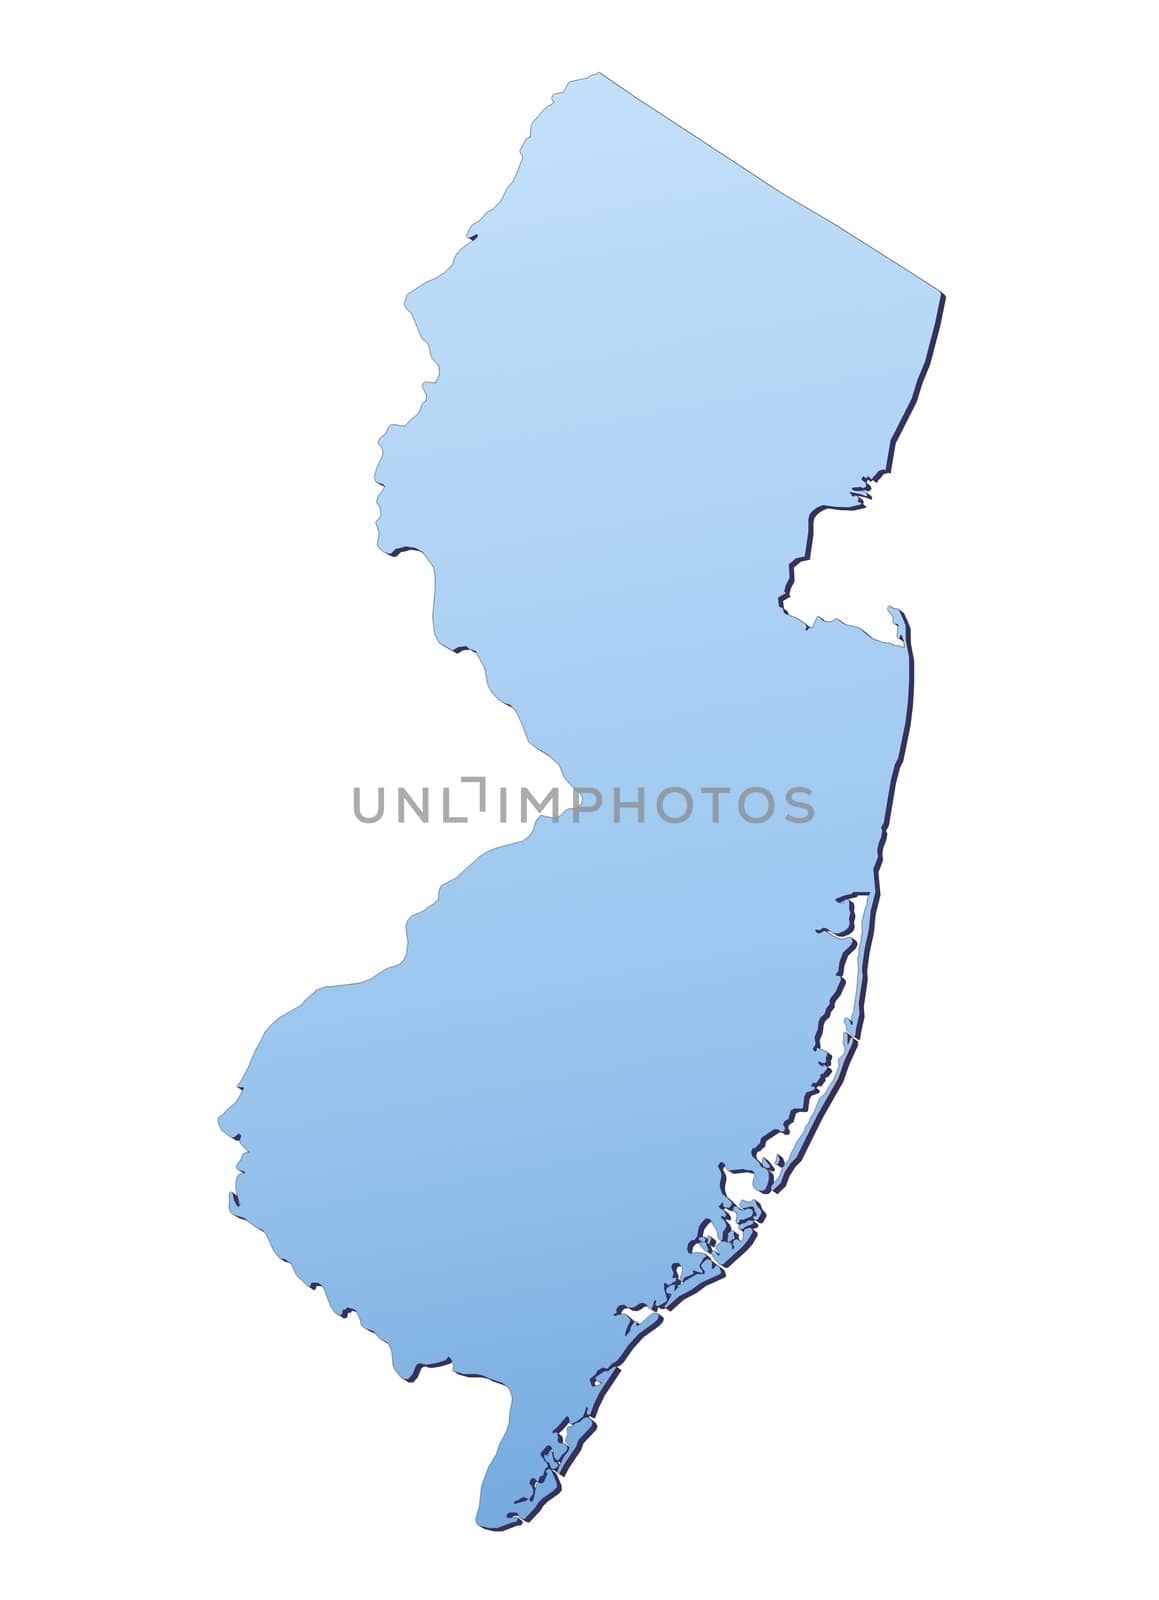 New Jersey(USA) map by skvoor